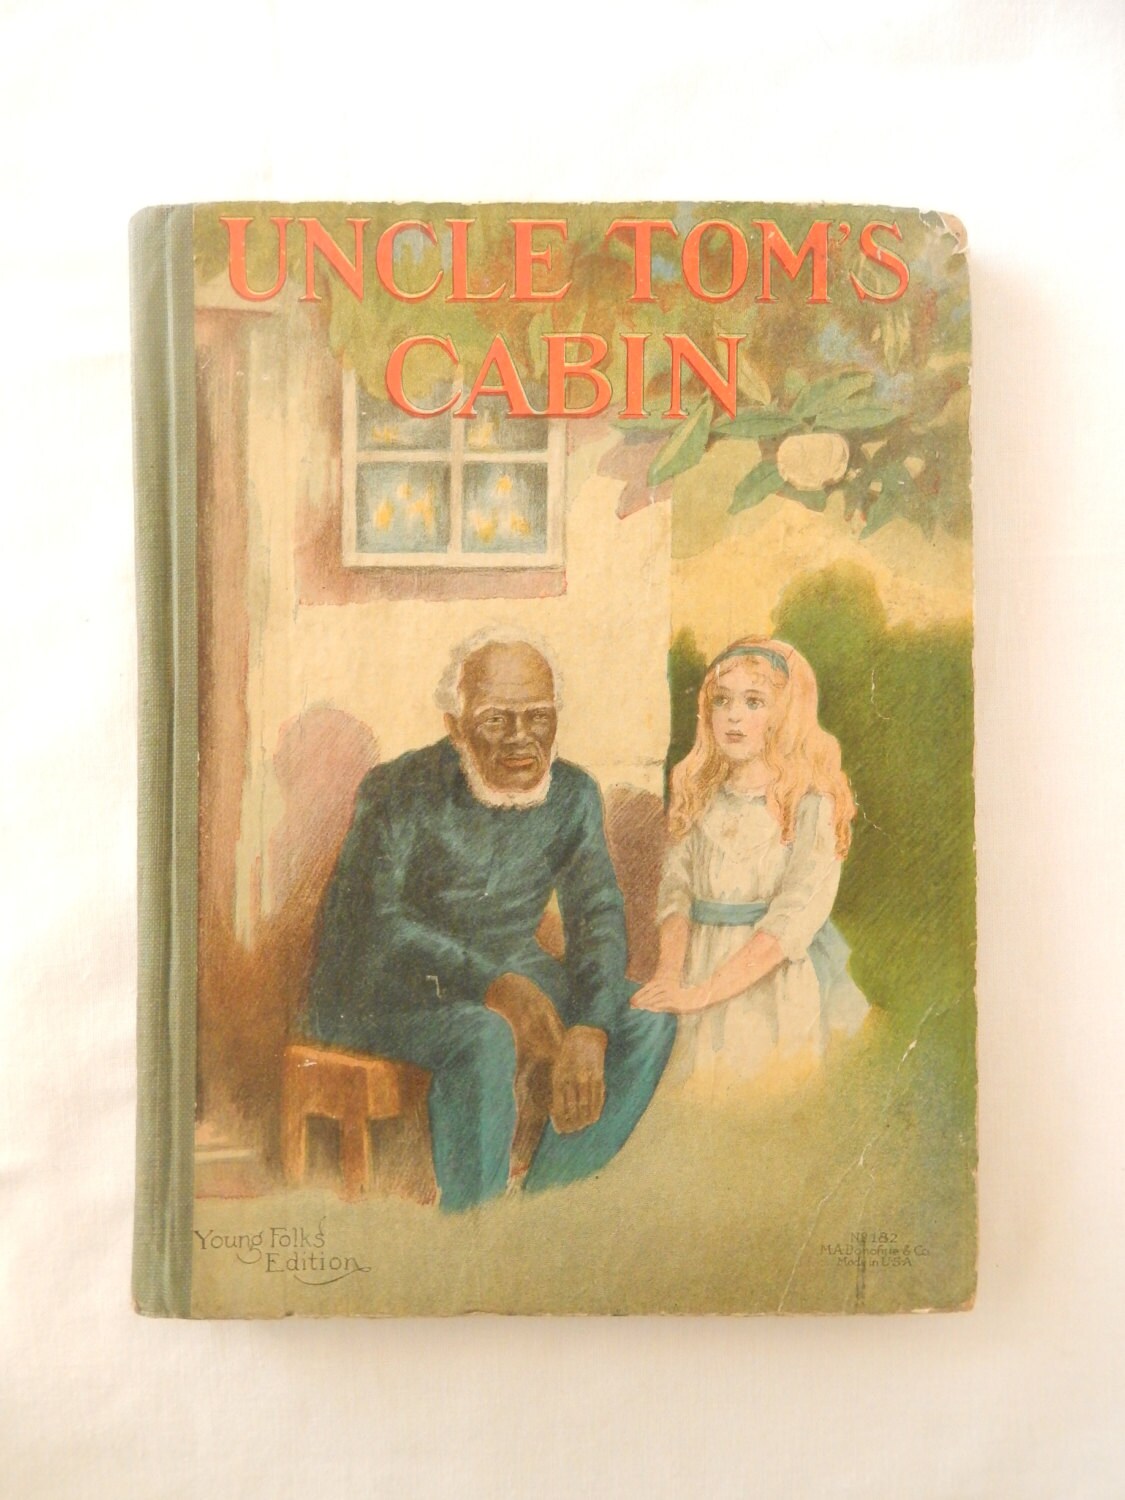 Uncle Tom's Cabin antique book c. 1905 illustrated by brixiana